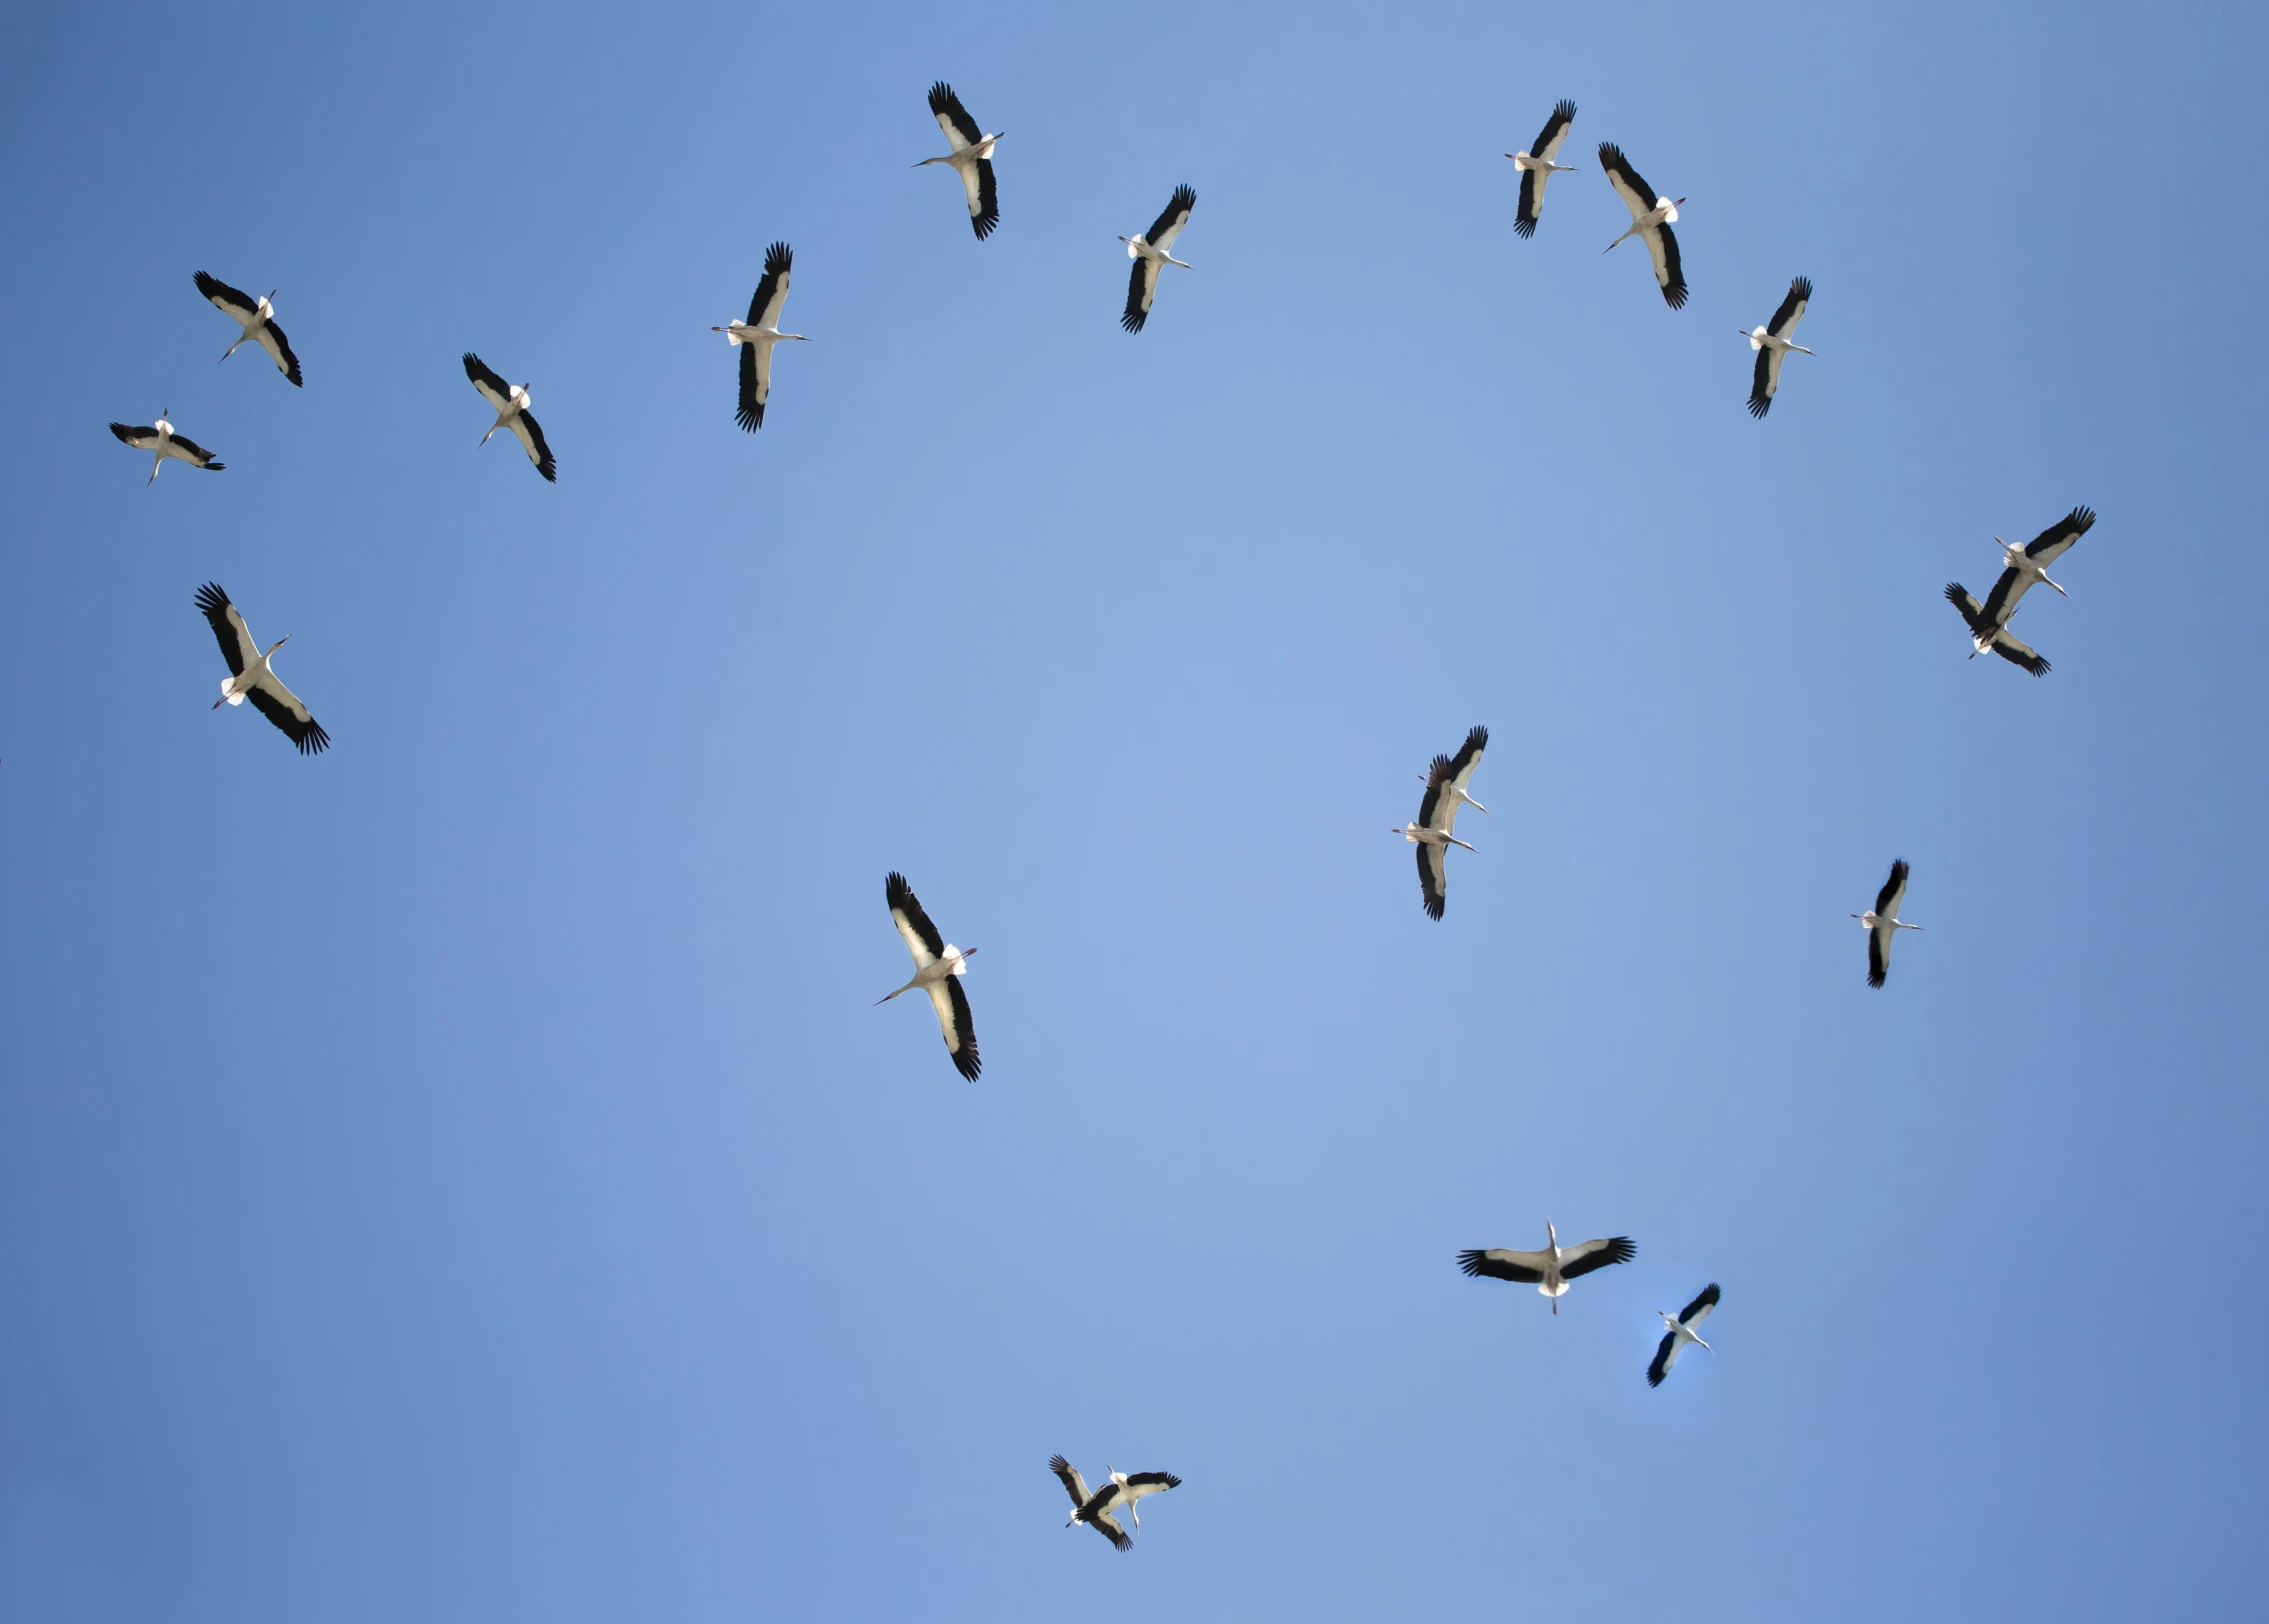 a group of seagulls flying through the air in formation